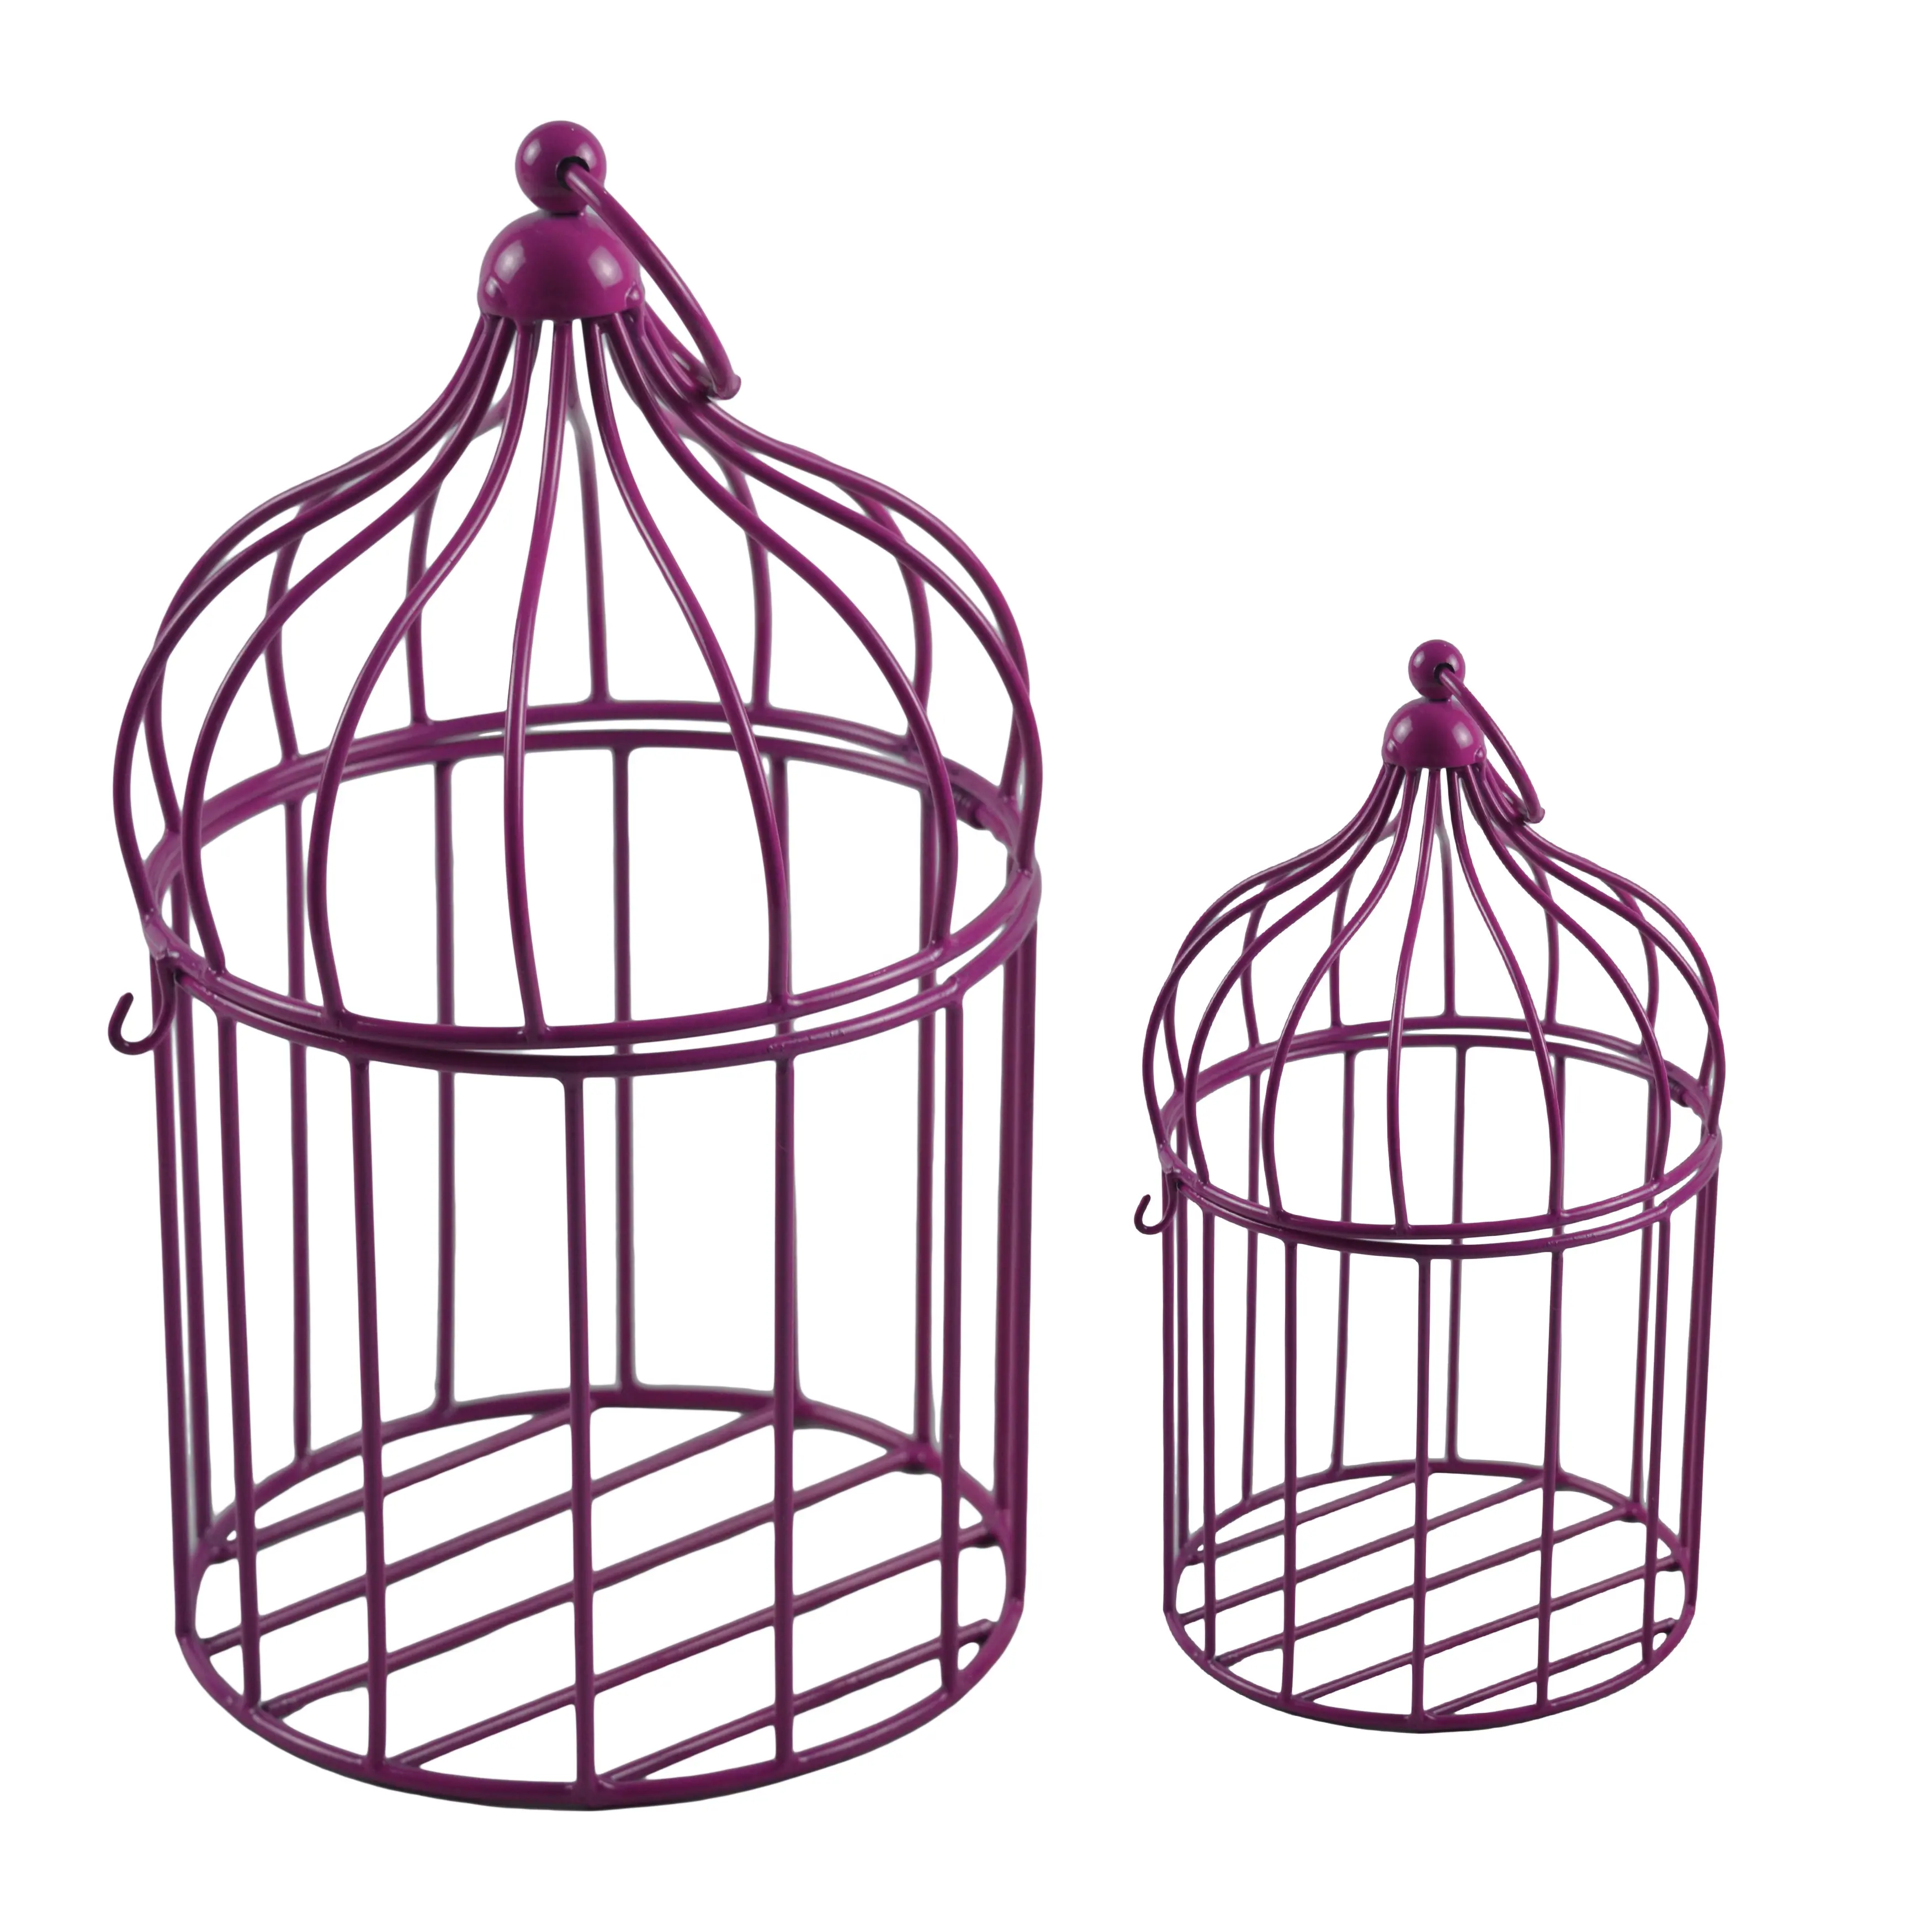 Best For Balcony Decorative Hanging Birds Cages With Purple Colored Painted Finishing New Fresh Design Bird Cages